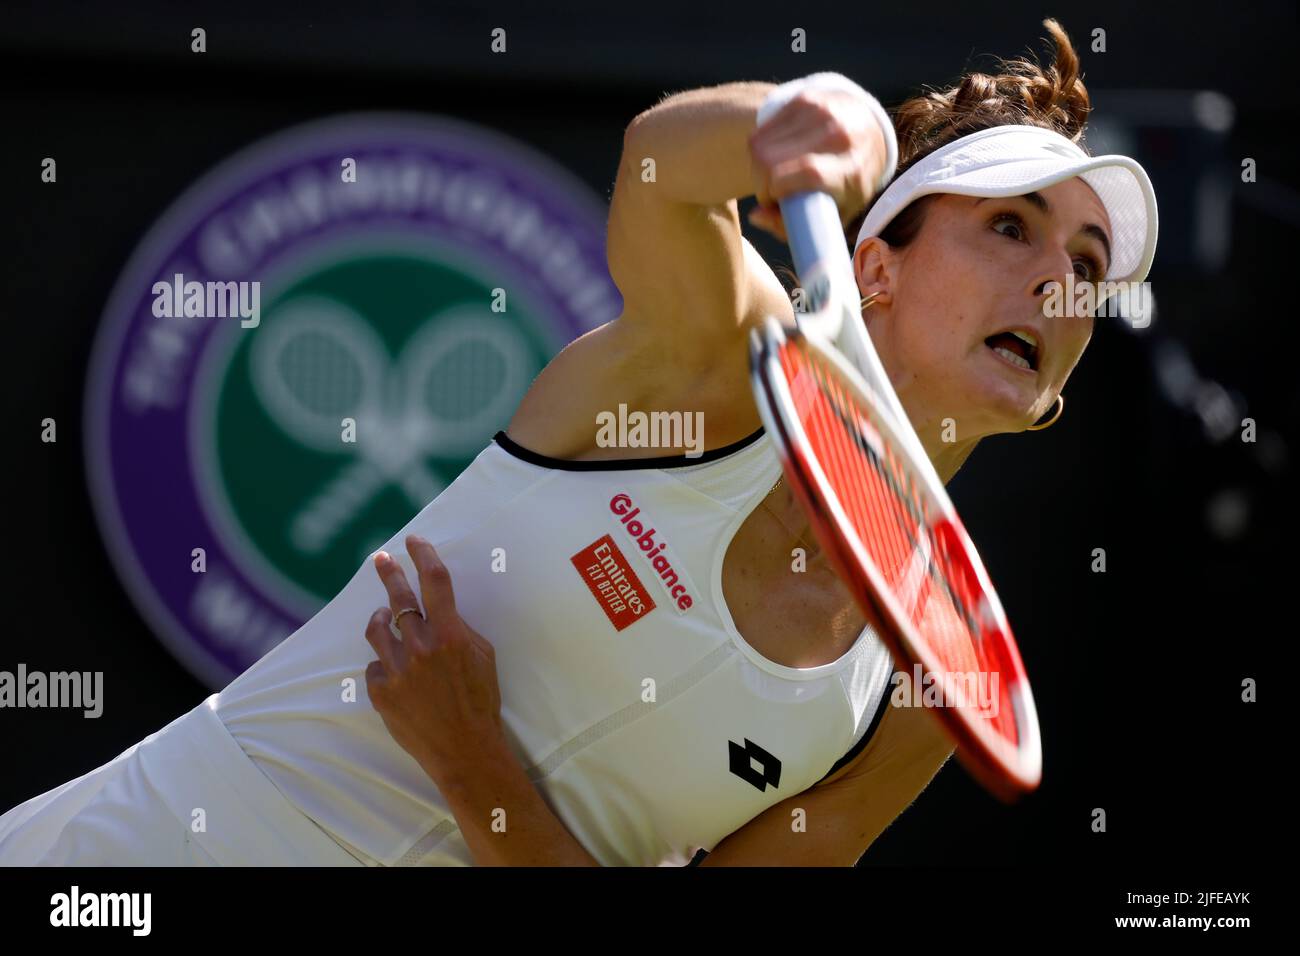 Alize Cornet in action during her Ladies’ Singles third round match against Iga Swiatek during day six of the 2022 Wimbledon Championships at the All England Lawn Tennis and Croquet Club, Wimbledon. Picture date: Saturday July 2, 2022. Stock Photo